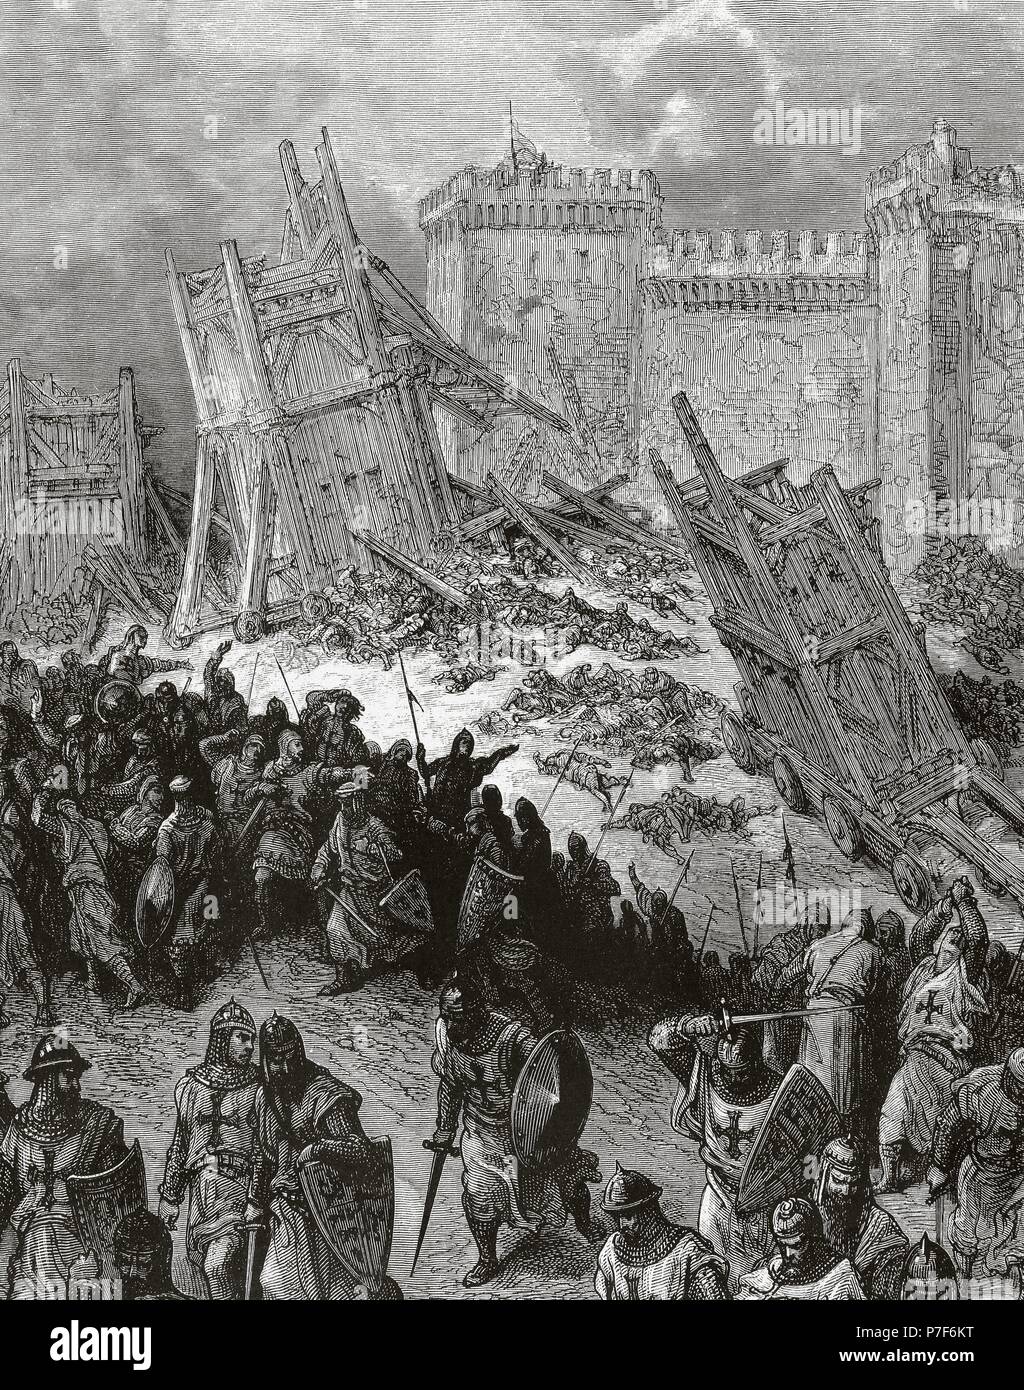 First Crusade (1096-1099). The siege of Antioch. It took place from 21 october, 1097 to 2 June, 1098. Engraving by Gustave Dore (1832-1883). Stock Photo